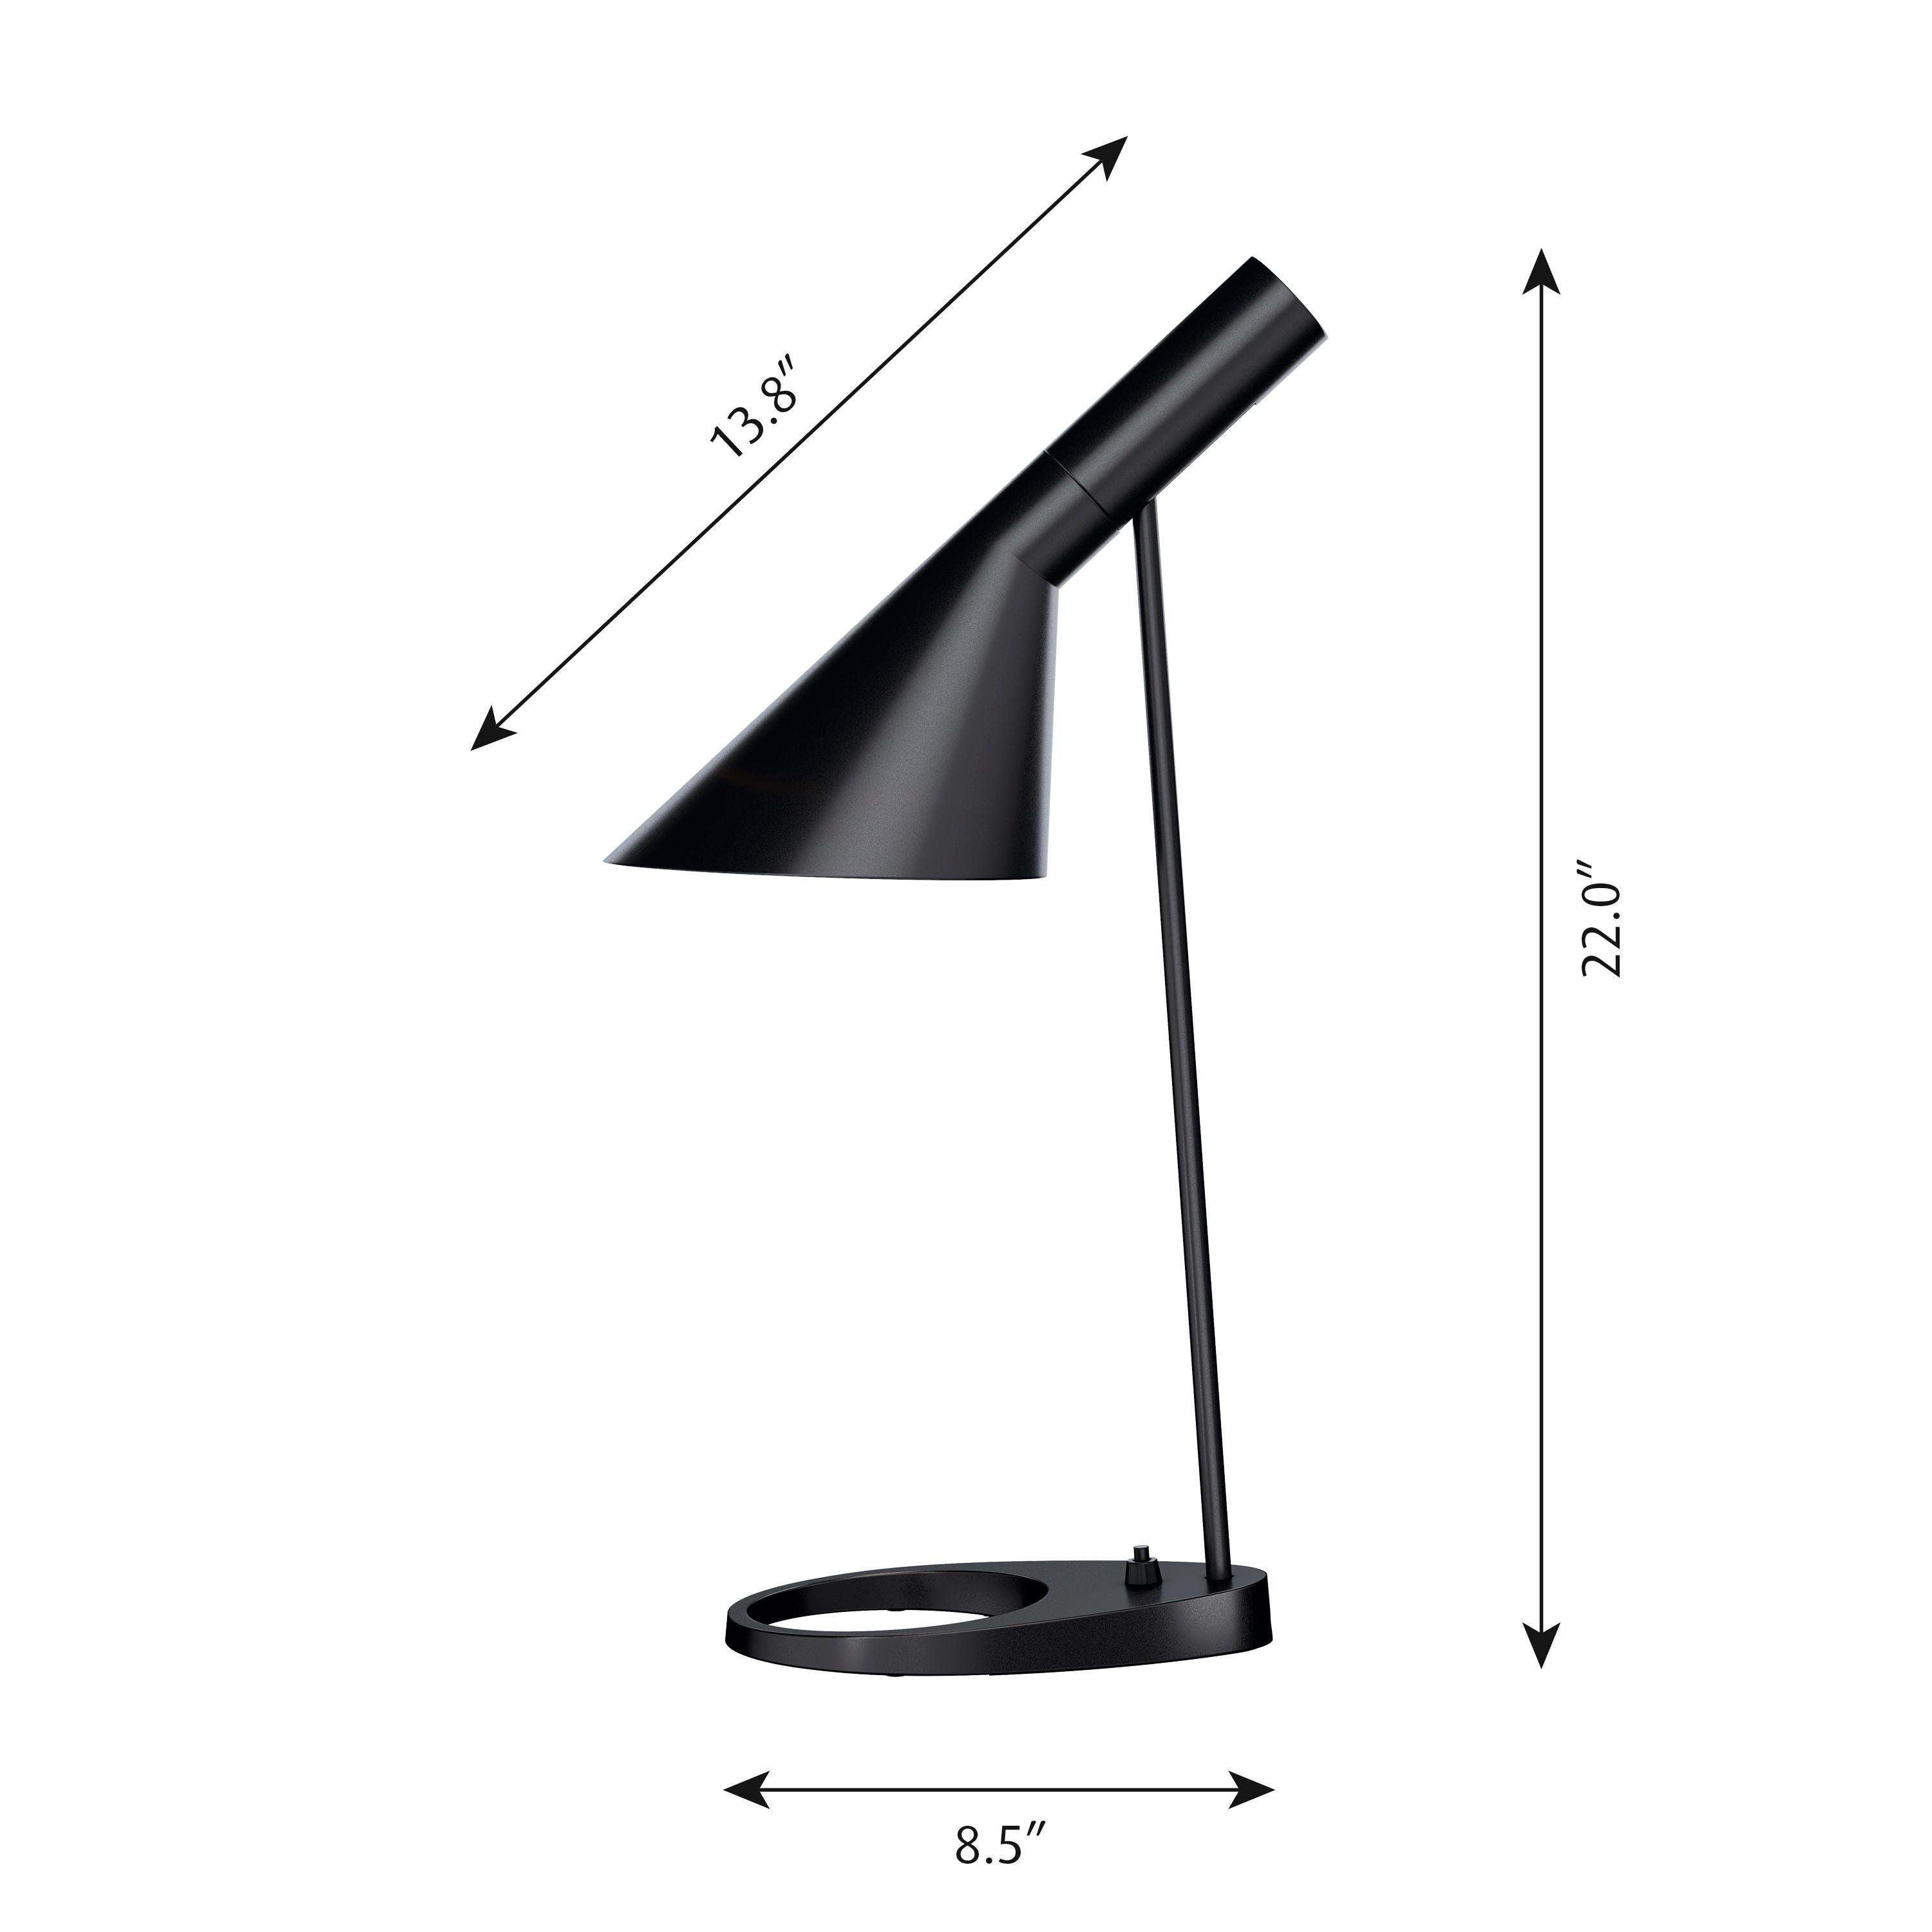 Arne Jacobsen AJ Table Lamp in Black for Louis Poulsen.

The AJ series was part of the lighting collection renowned Danish designer Arne Jacobsen created for the original SAS Royal Hotel in 1957. Today, his furniture and lighting designs are sought